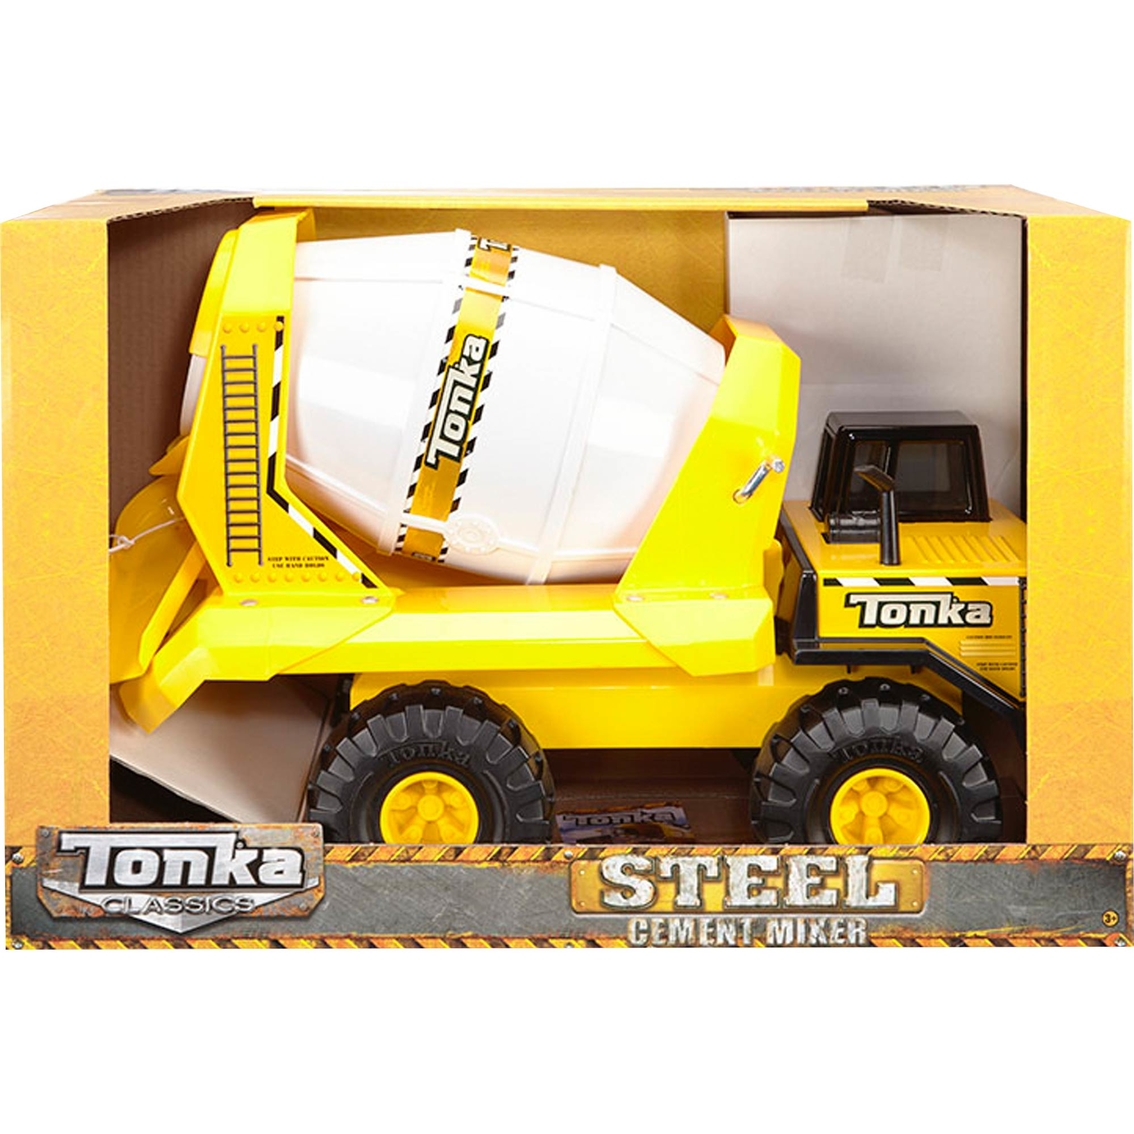 Tonka Steel Classic Cement Mixer Construction Toys for Kids